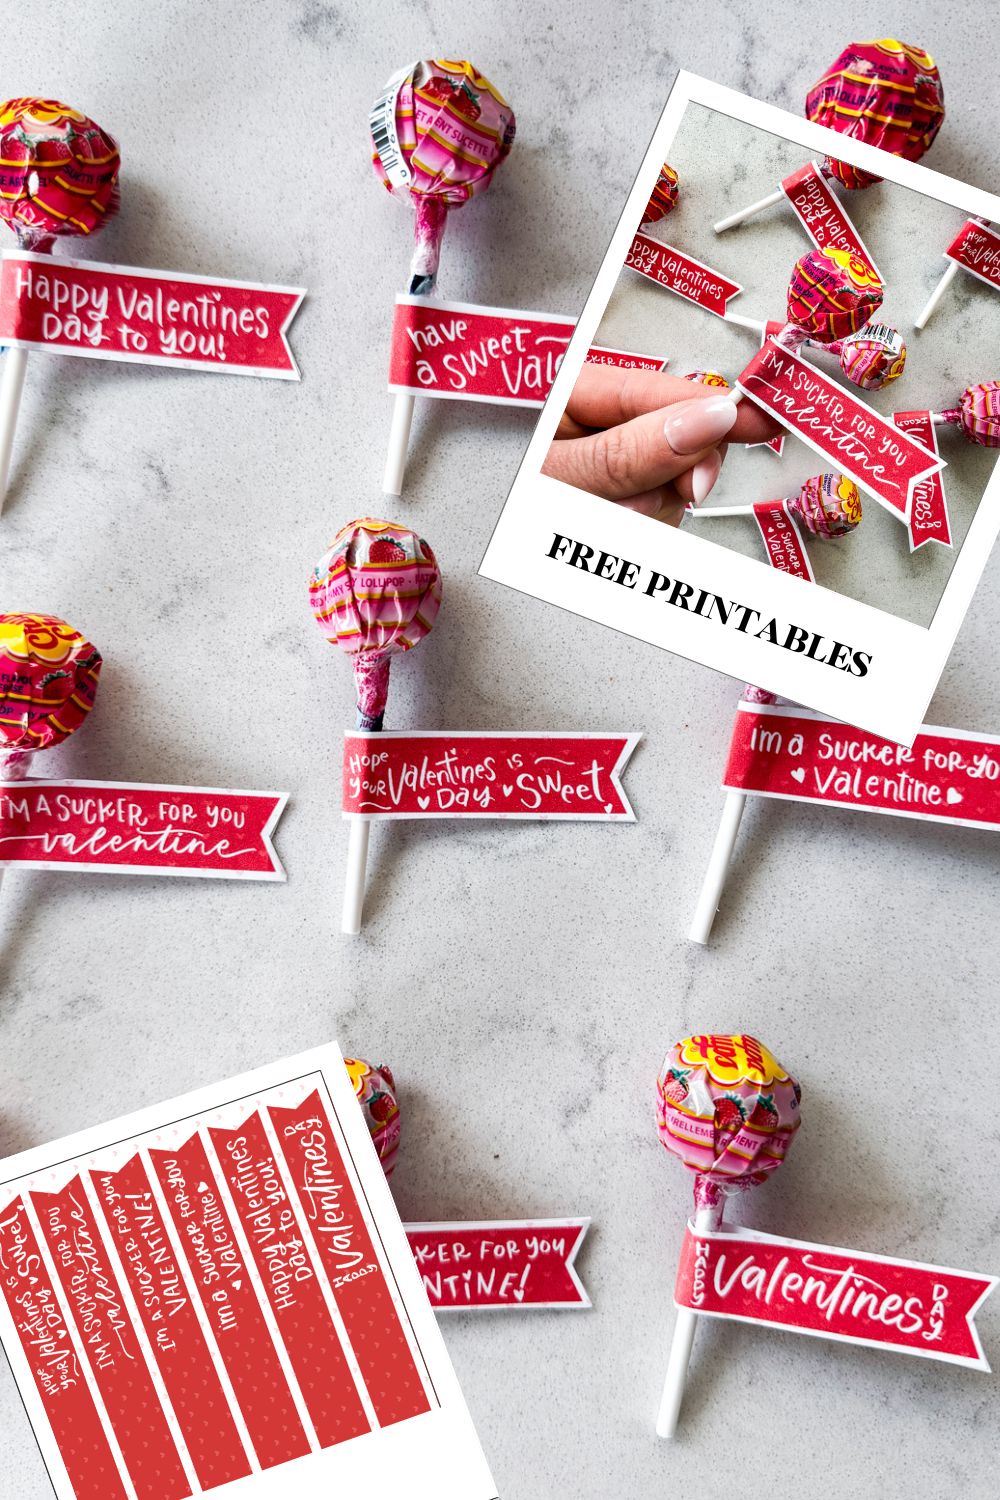 image of pink and red suckers with valentines flags printed and taped to sticks that read 'im a sucker for you, valentine', 'happy valentines day to you', 'hope your valentines day is sweet' etc. text over reads 'free printables'